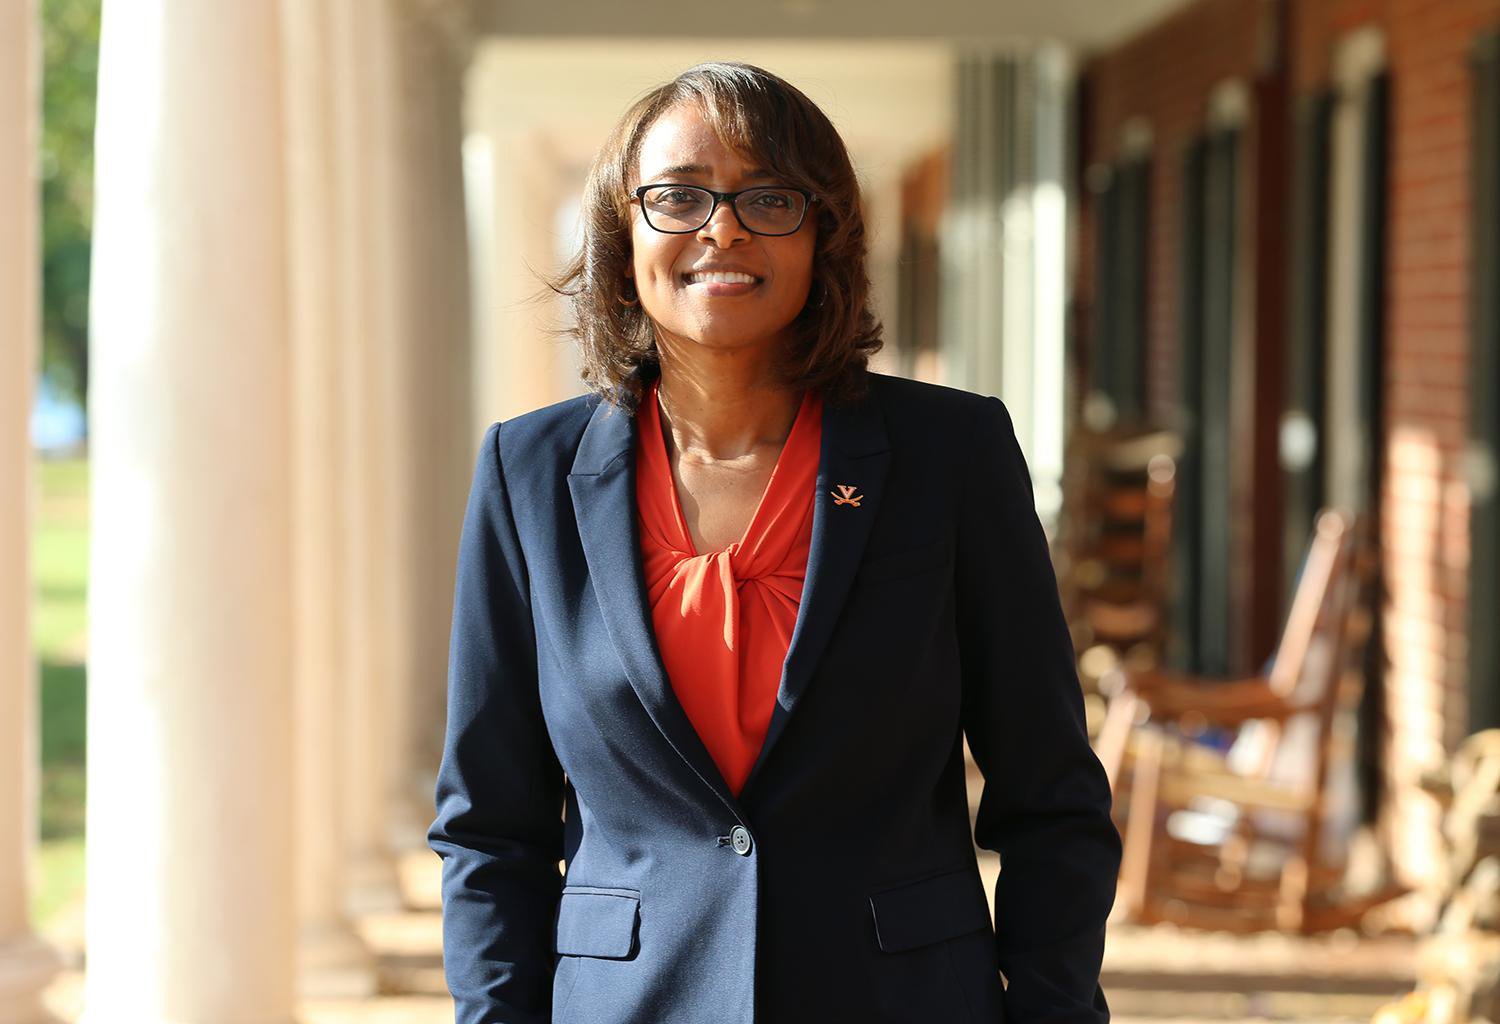 PHOTO: Carla Williams joins the University of Virginia as director of athletics she is seen here in this undated file photo.